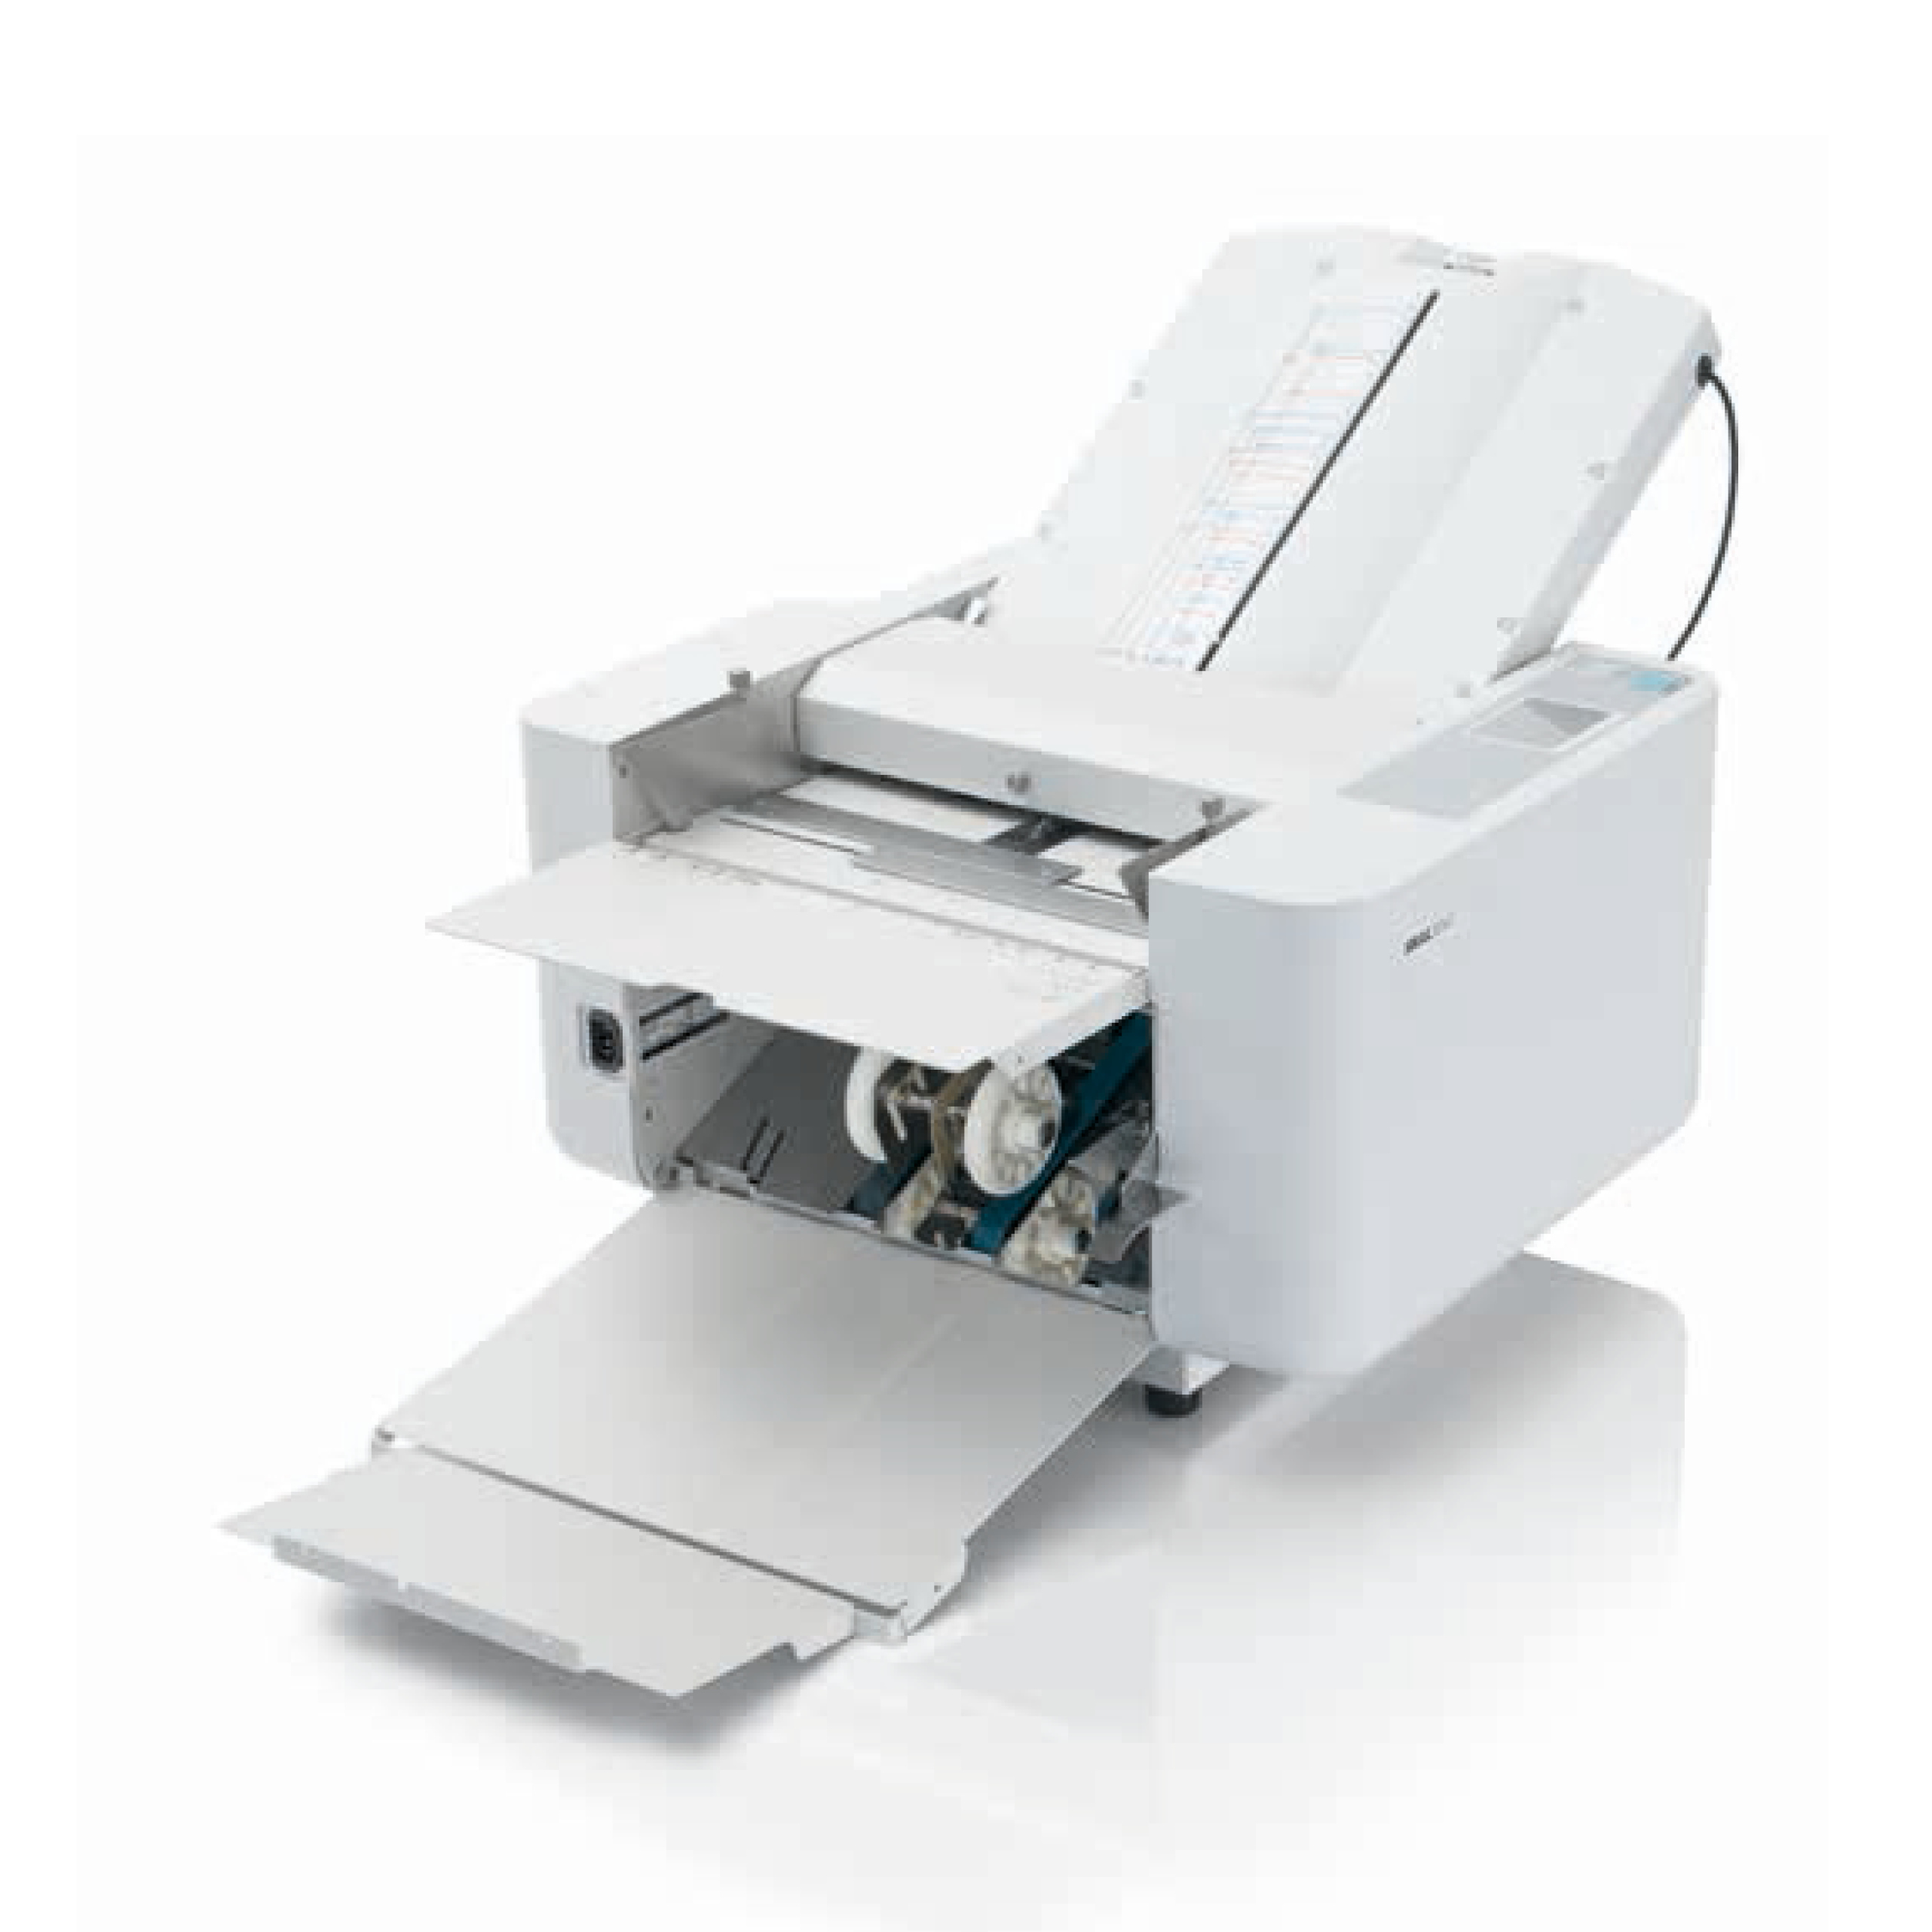 IDEAL 8345 - Folding machine - single, letter, zigzag, double parallel, cross fold - » and zigzag fold with filing margin
» Operation and s...